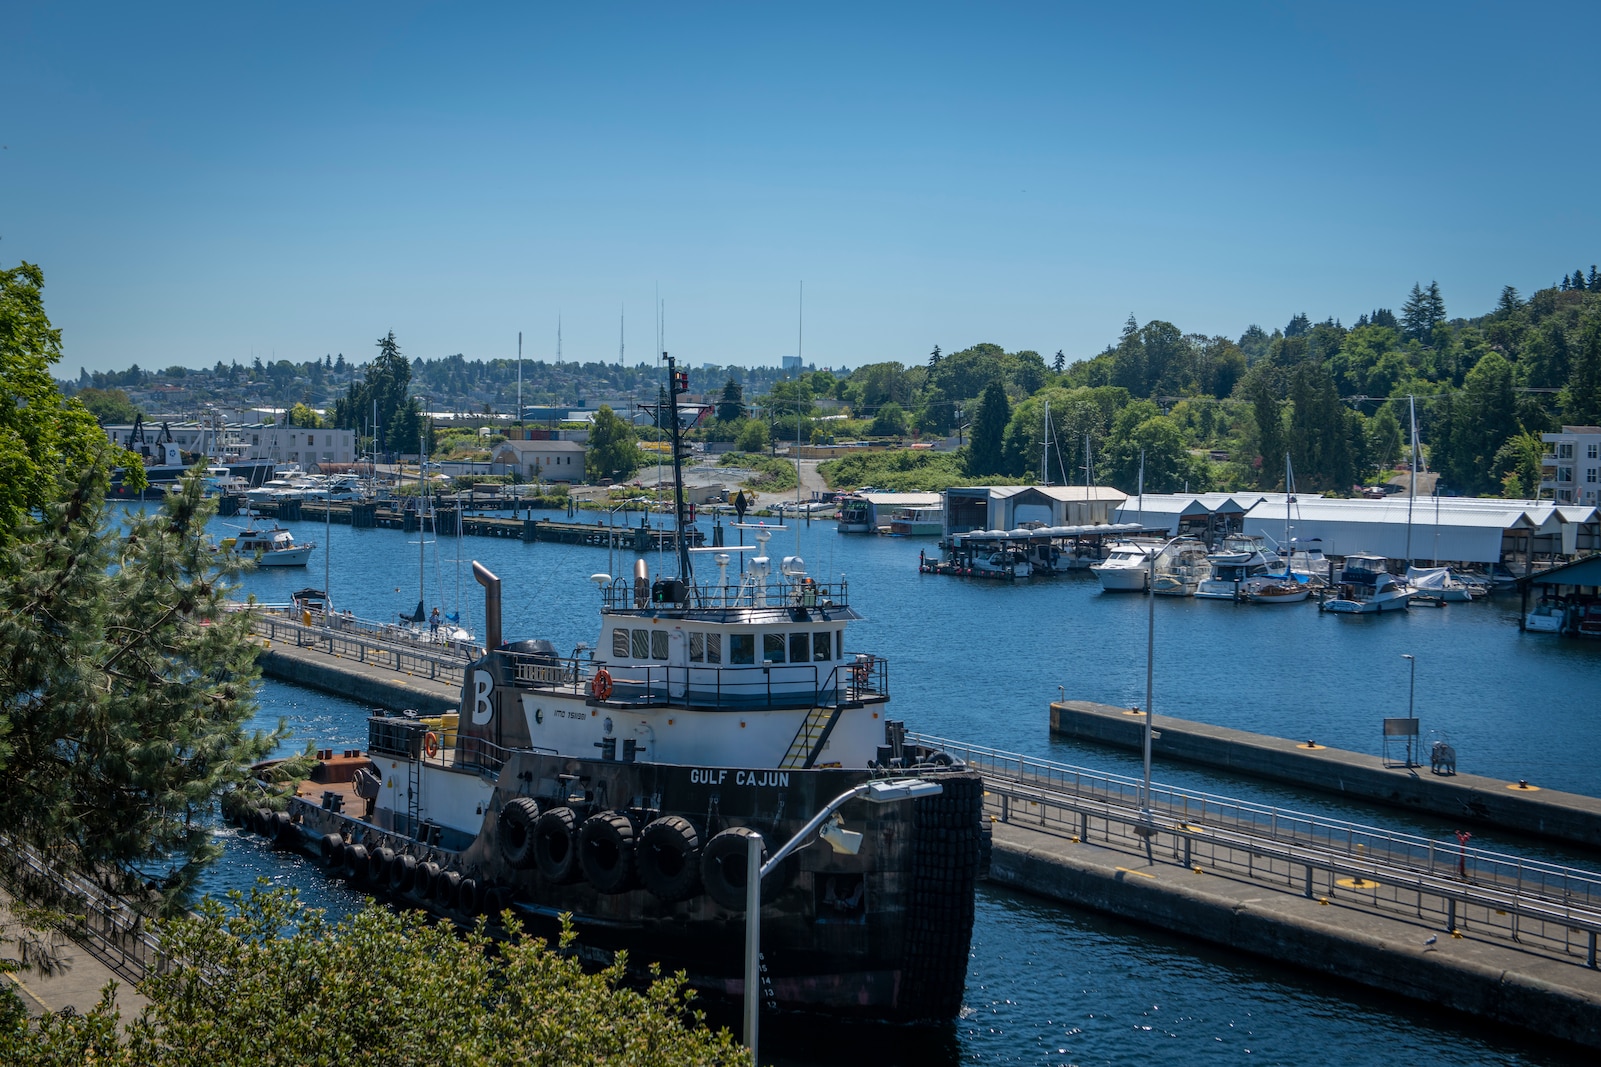 The Gulf Cajun commercial vessel approaches the large lock, Lake Washington Ship Canal and Hiram M. Chittenden Locks.